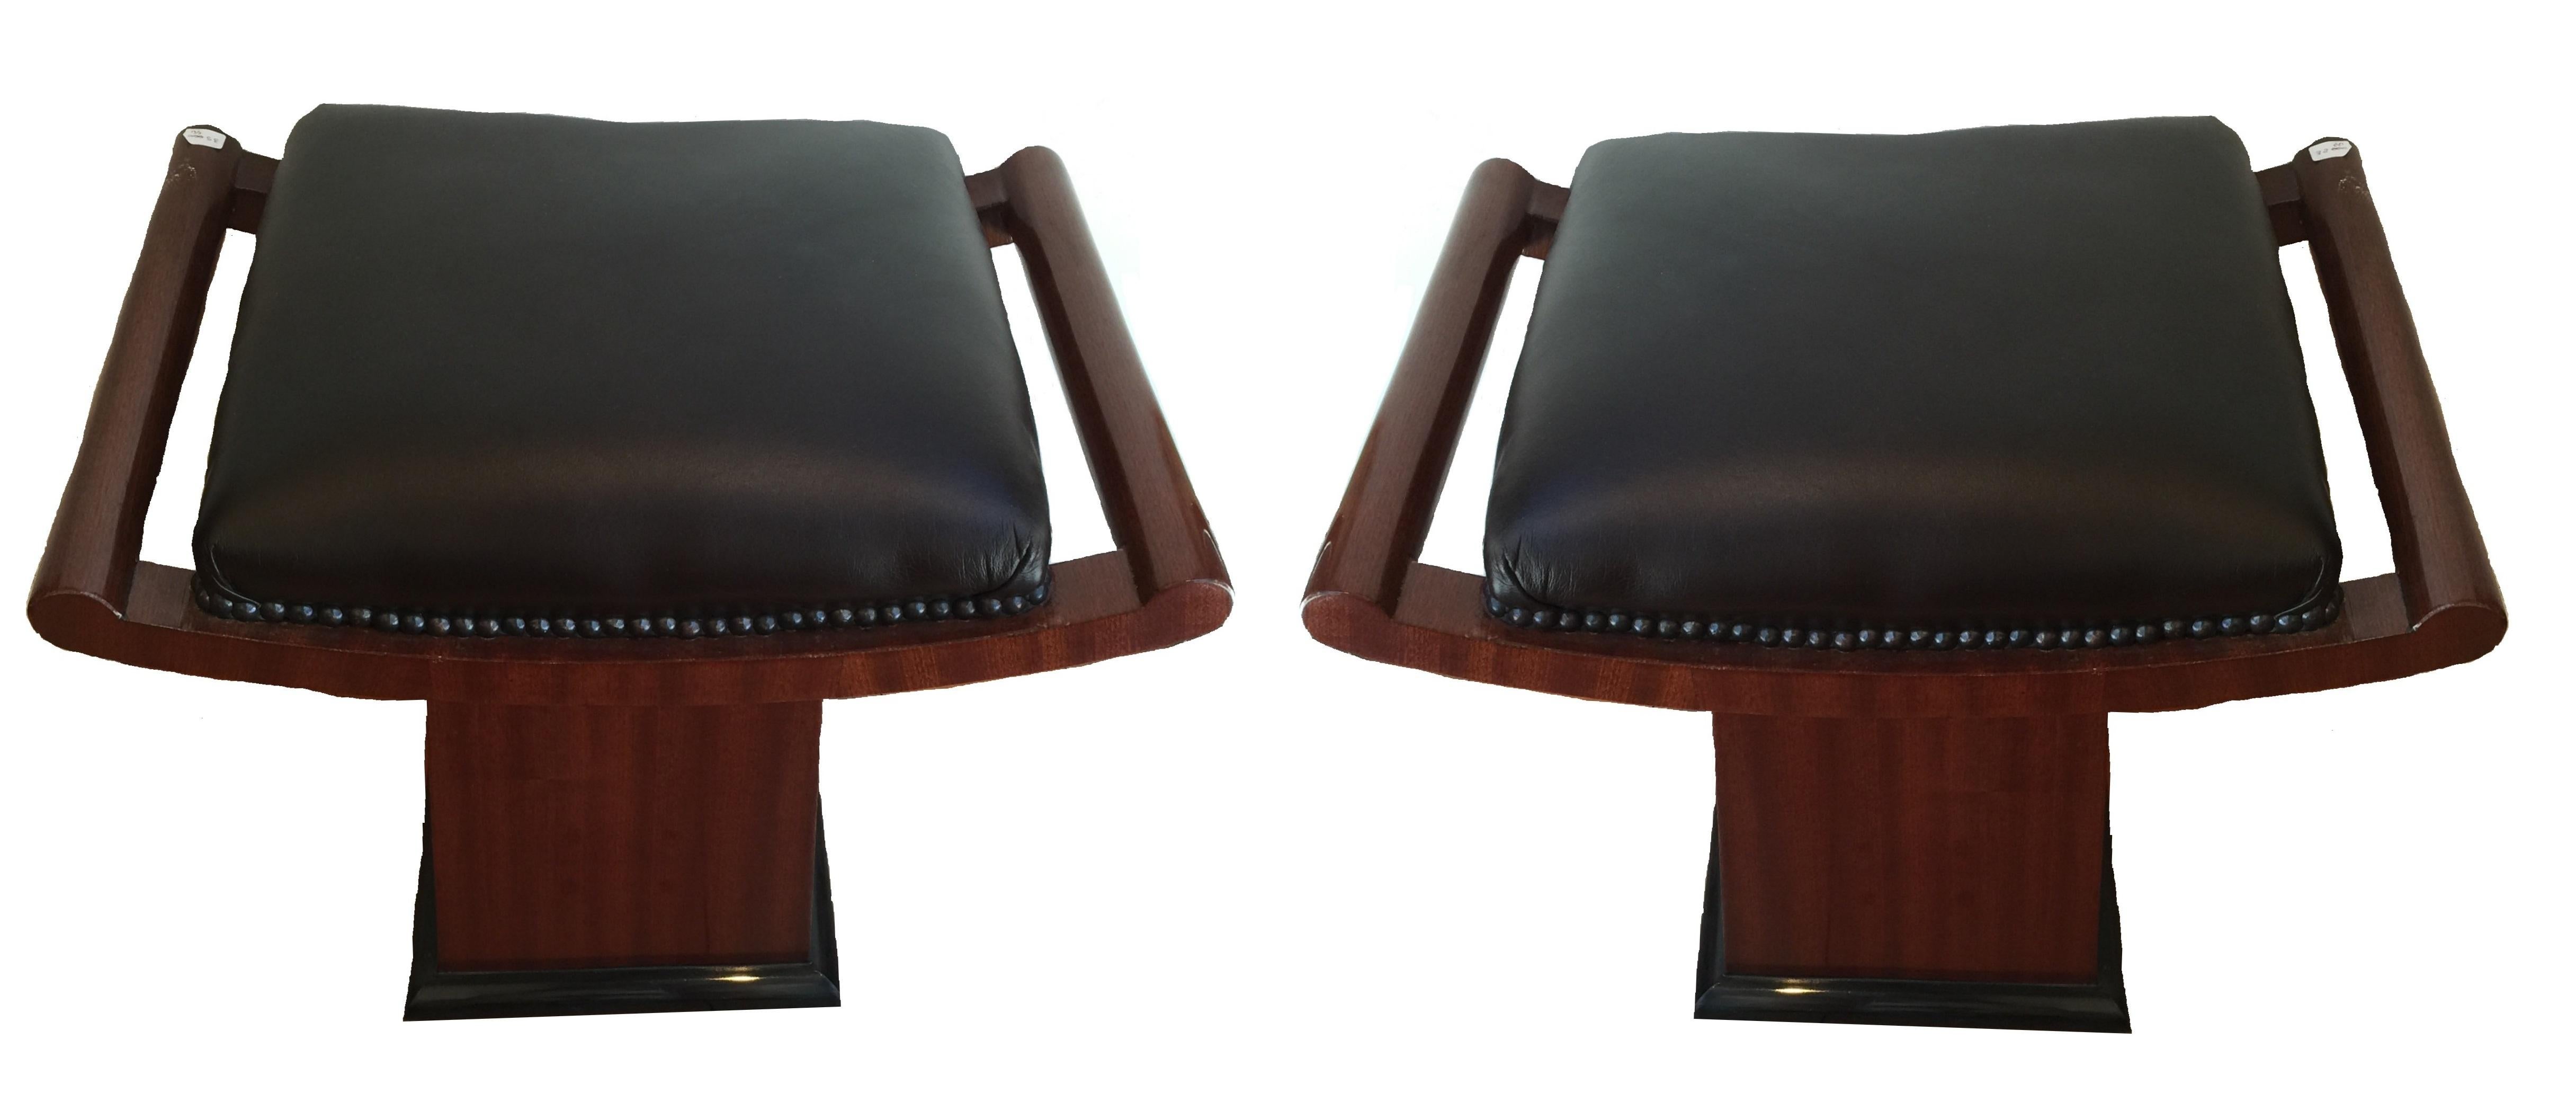 Mid-20th Century 2 Amaizing Art Deco Stool in Leather and Wood, France, 1940 For Sale